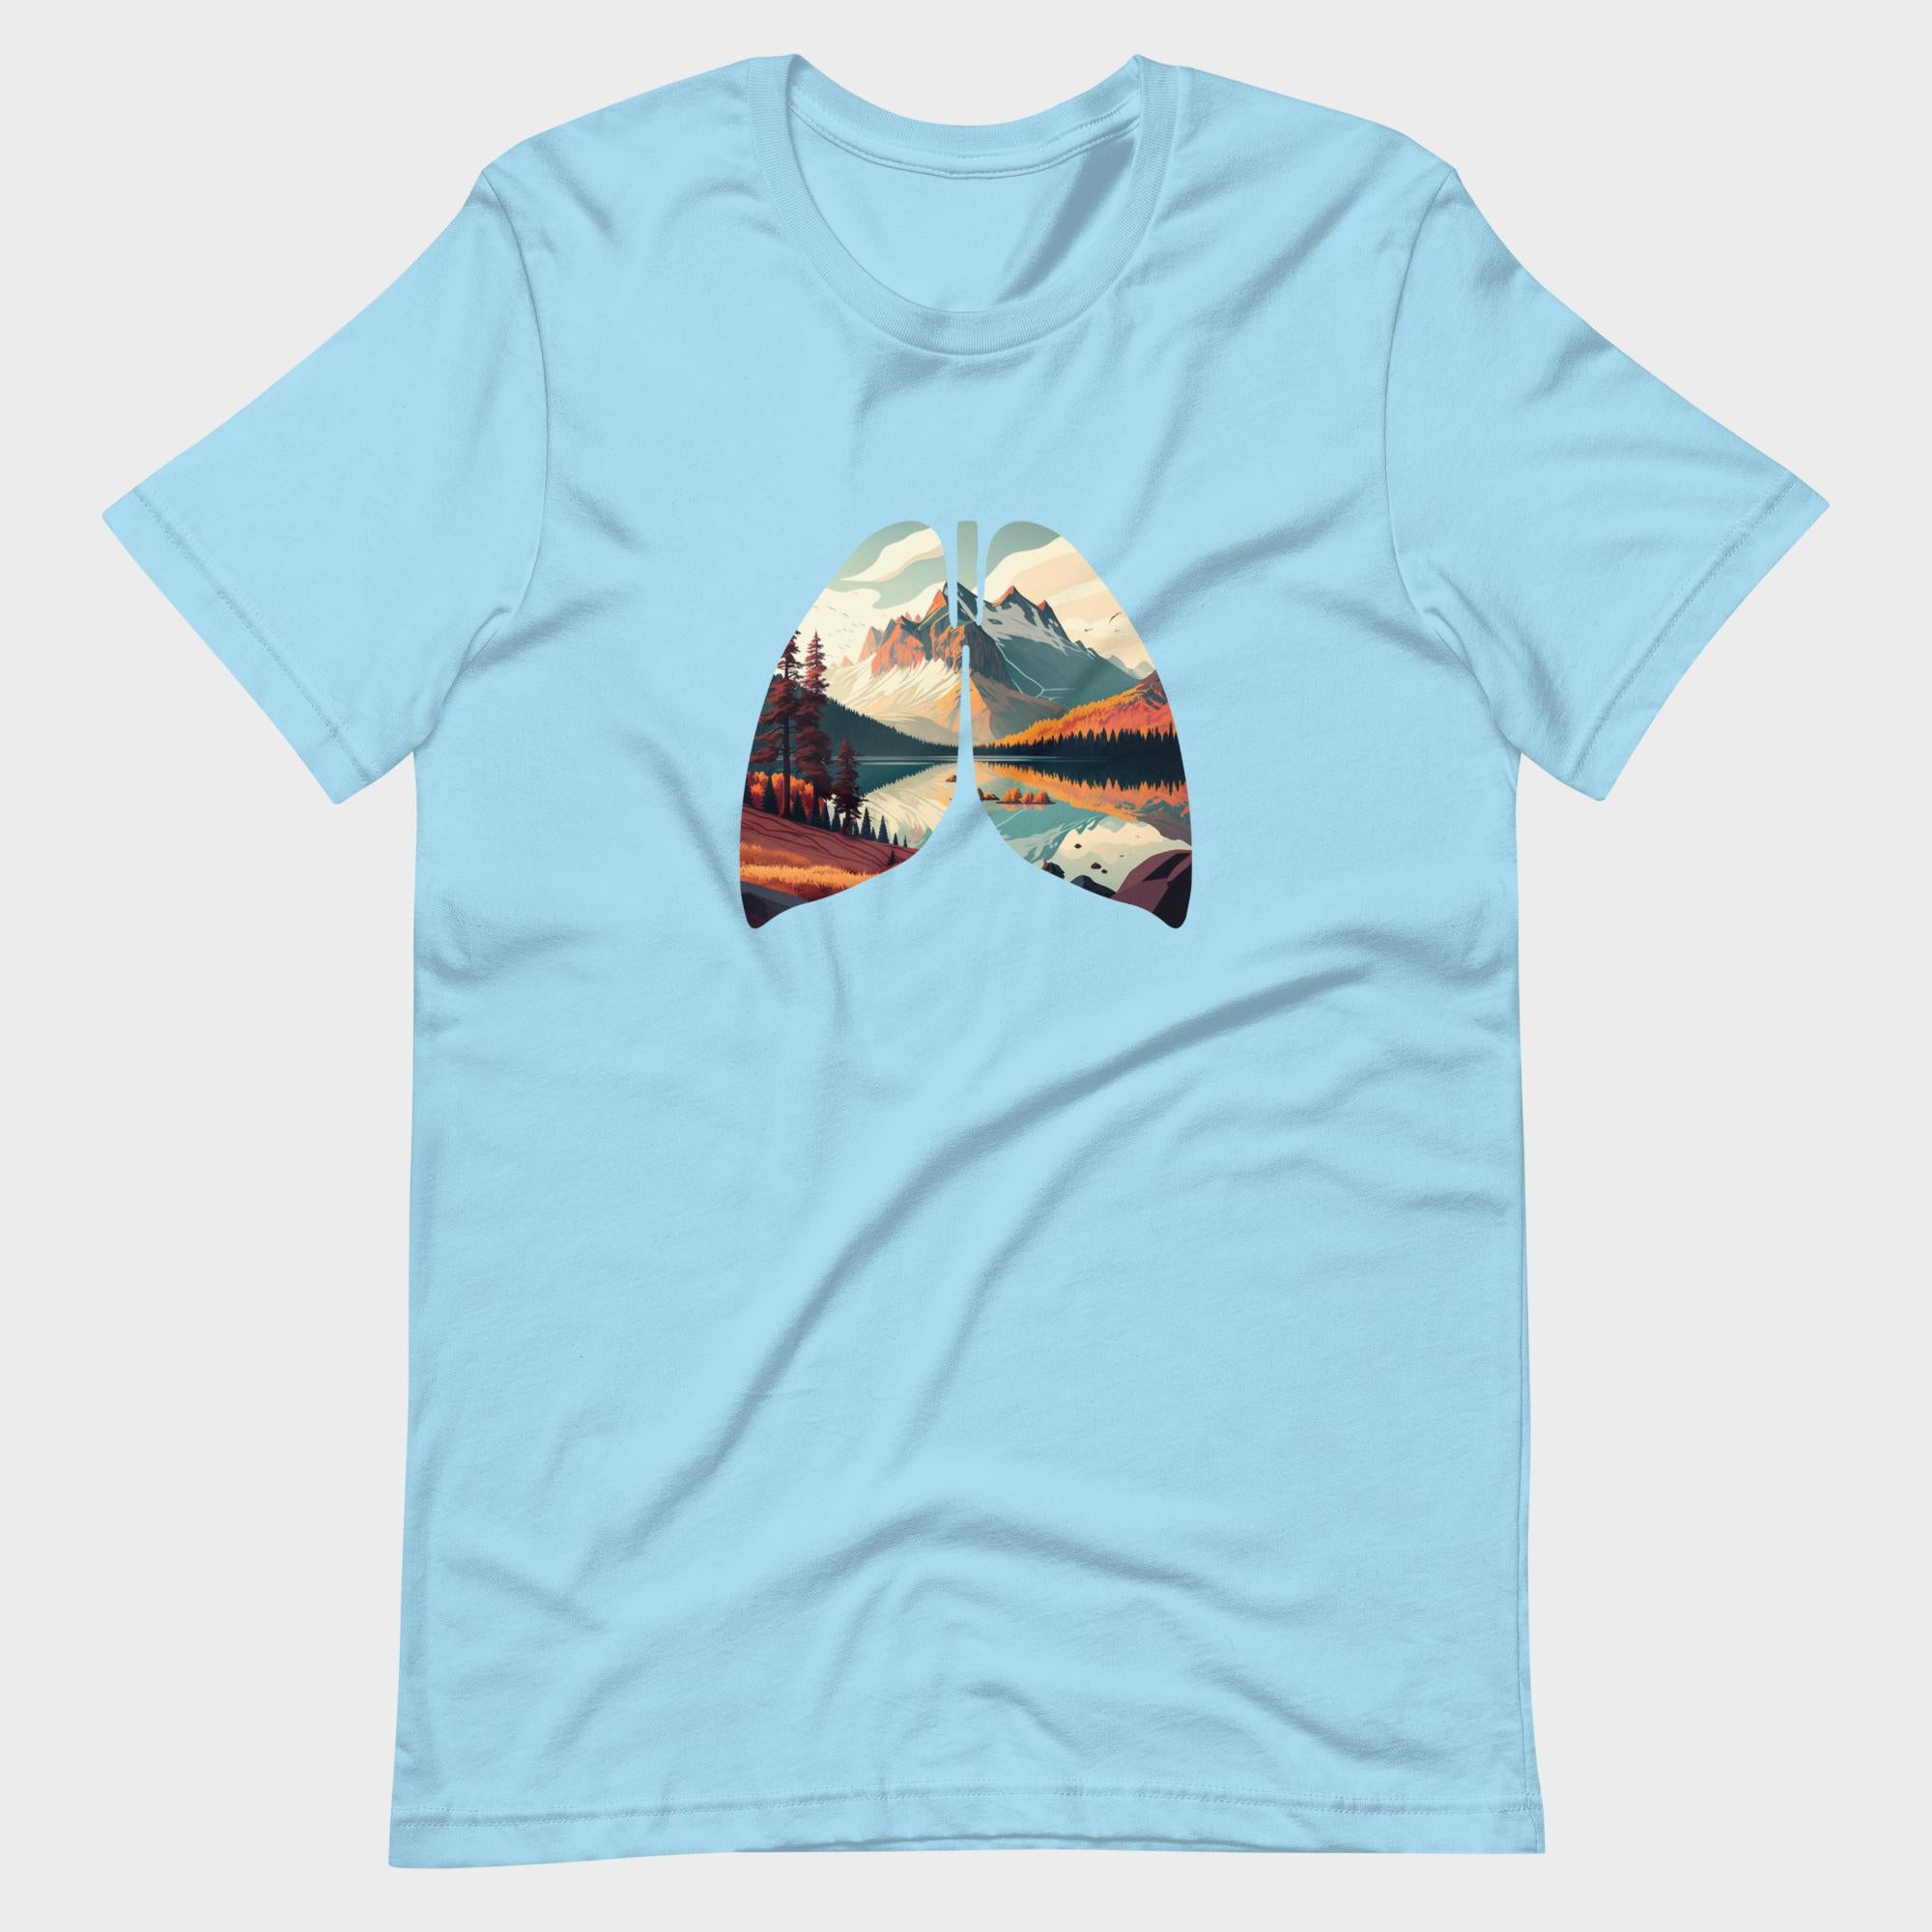 Breathe In Nature - T-Shirt